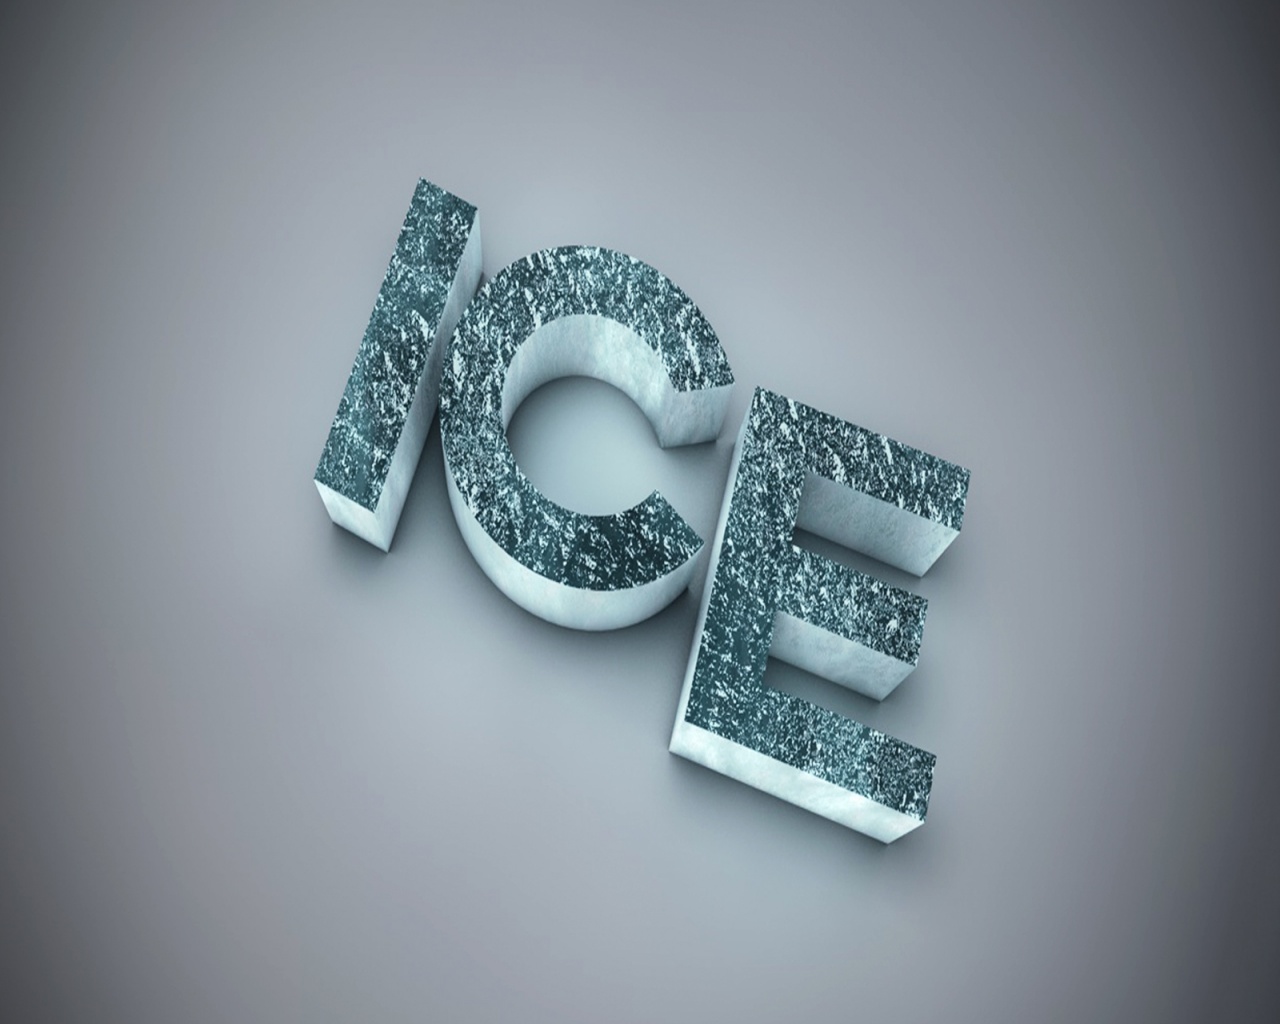 3D Text Effect, Thick and Glowing Letters, Gray to Black Background, Shall be Impressive 1280X1024 free wallpaper download